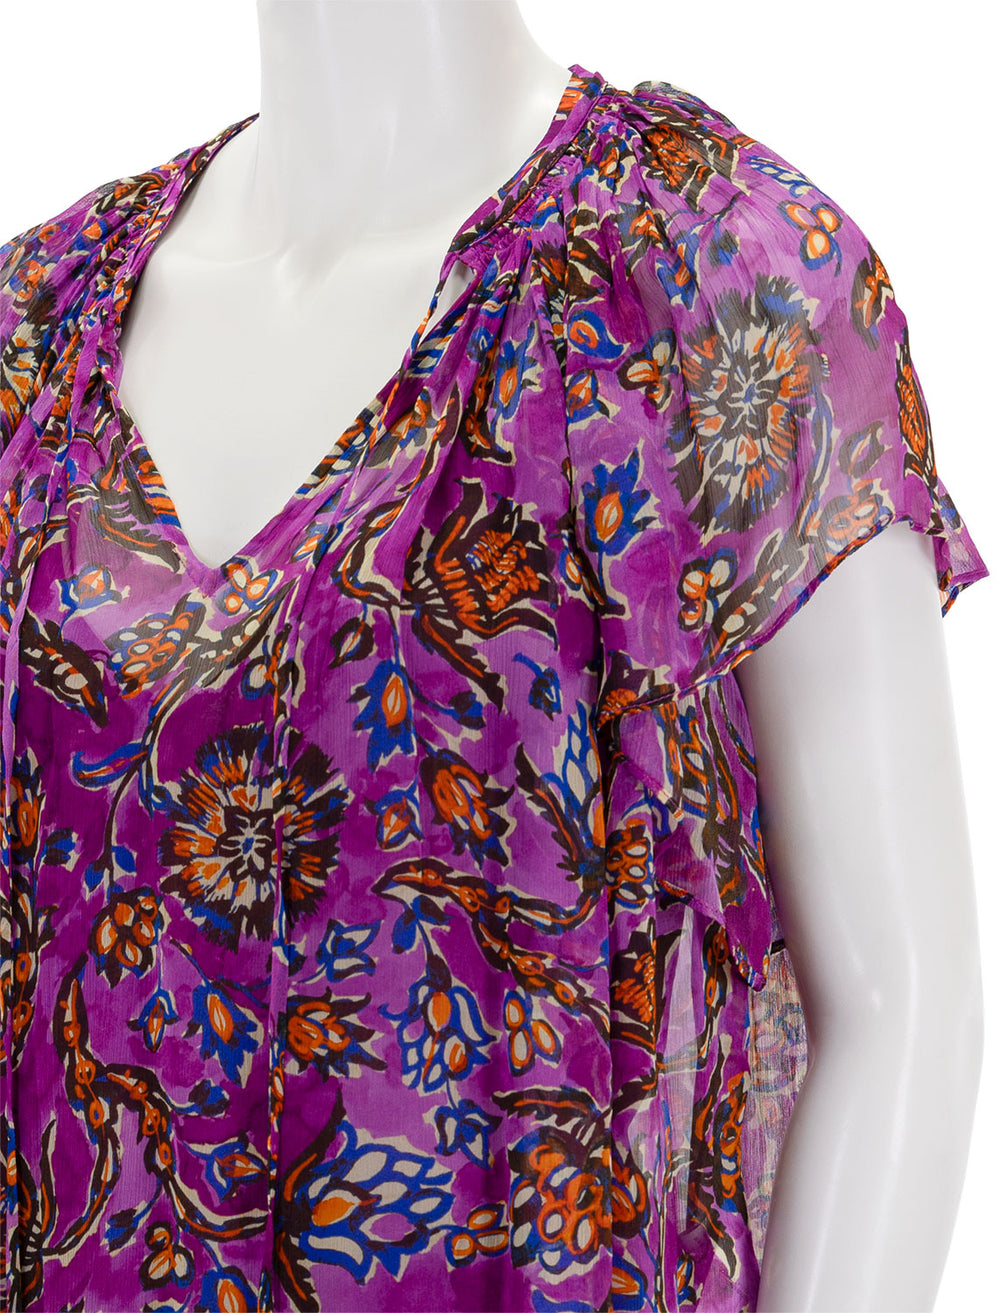 Close-up view of Vanessa Bruno's cantin top in violet floral.